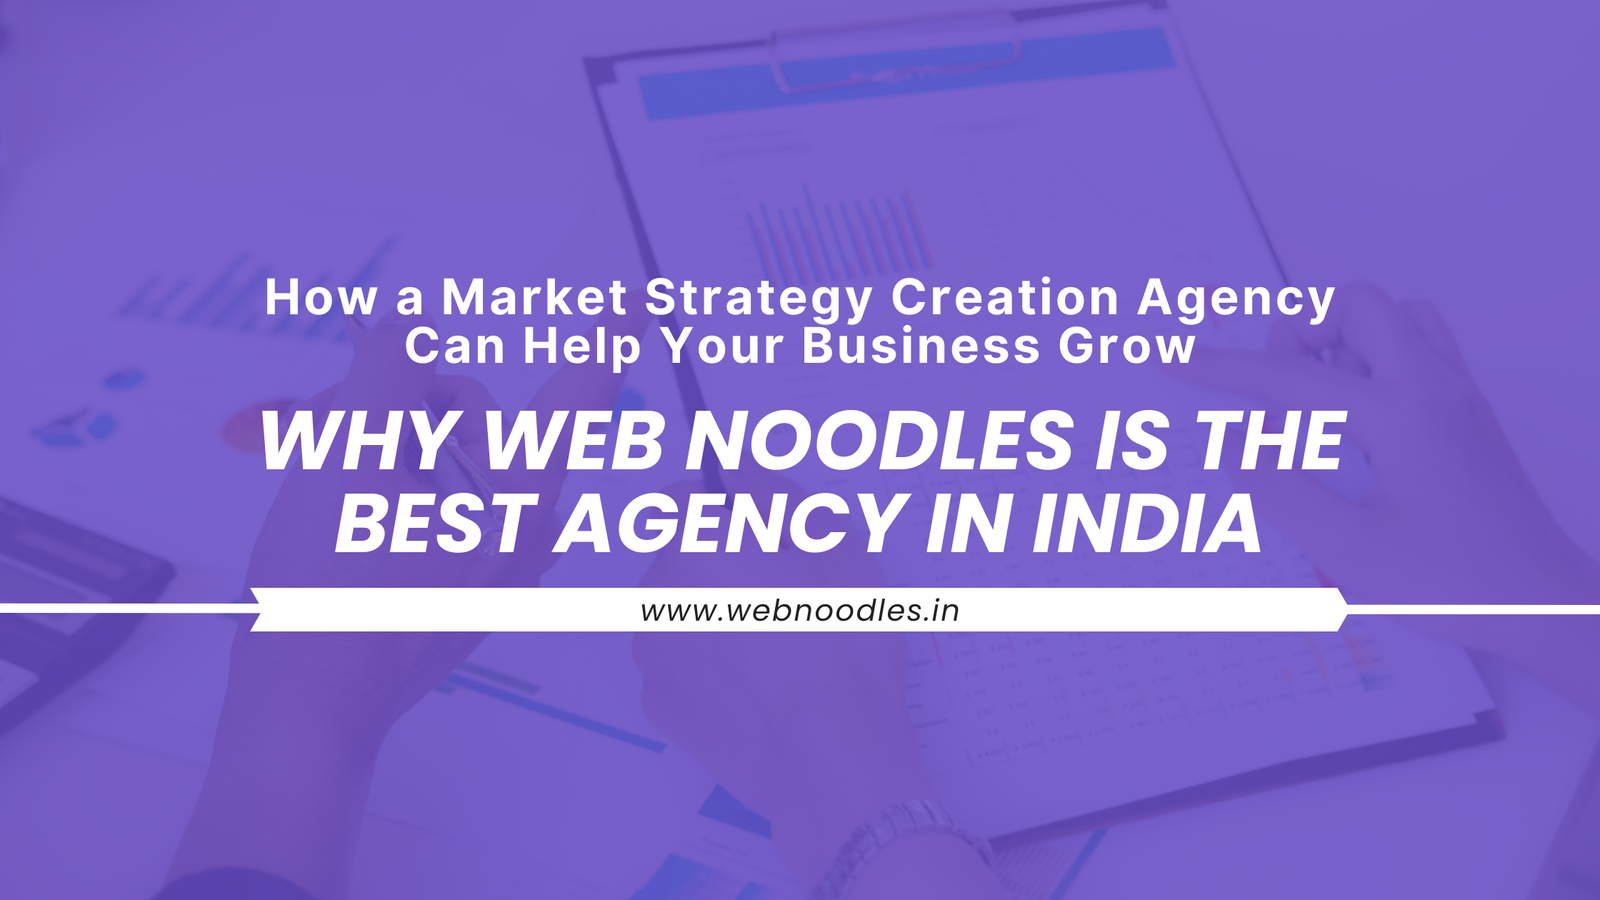 Why Web Noodles is the best marketing strategy creation agency in India